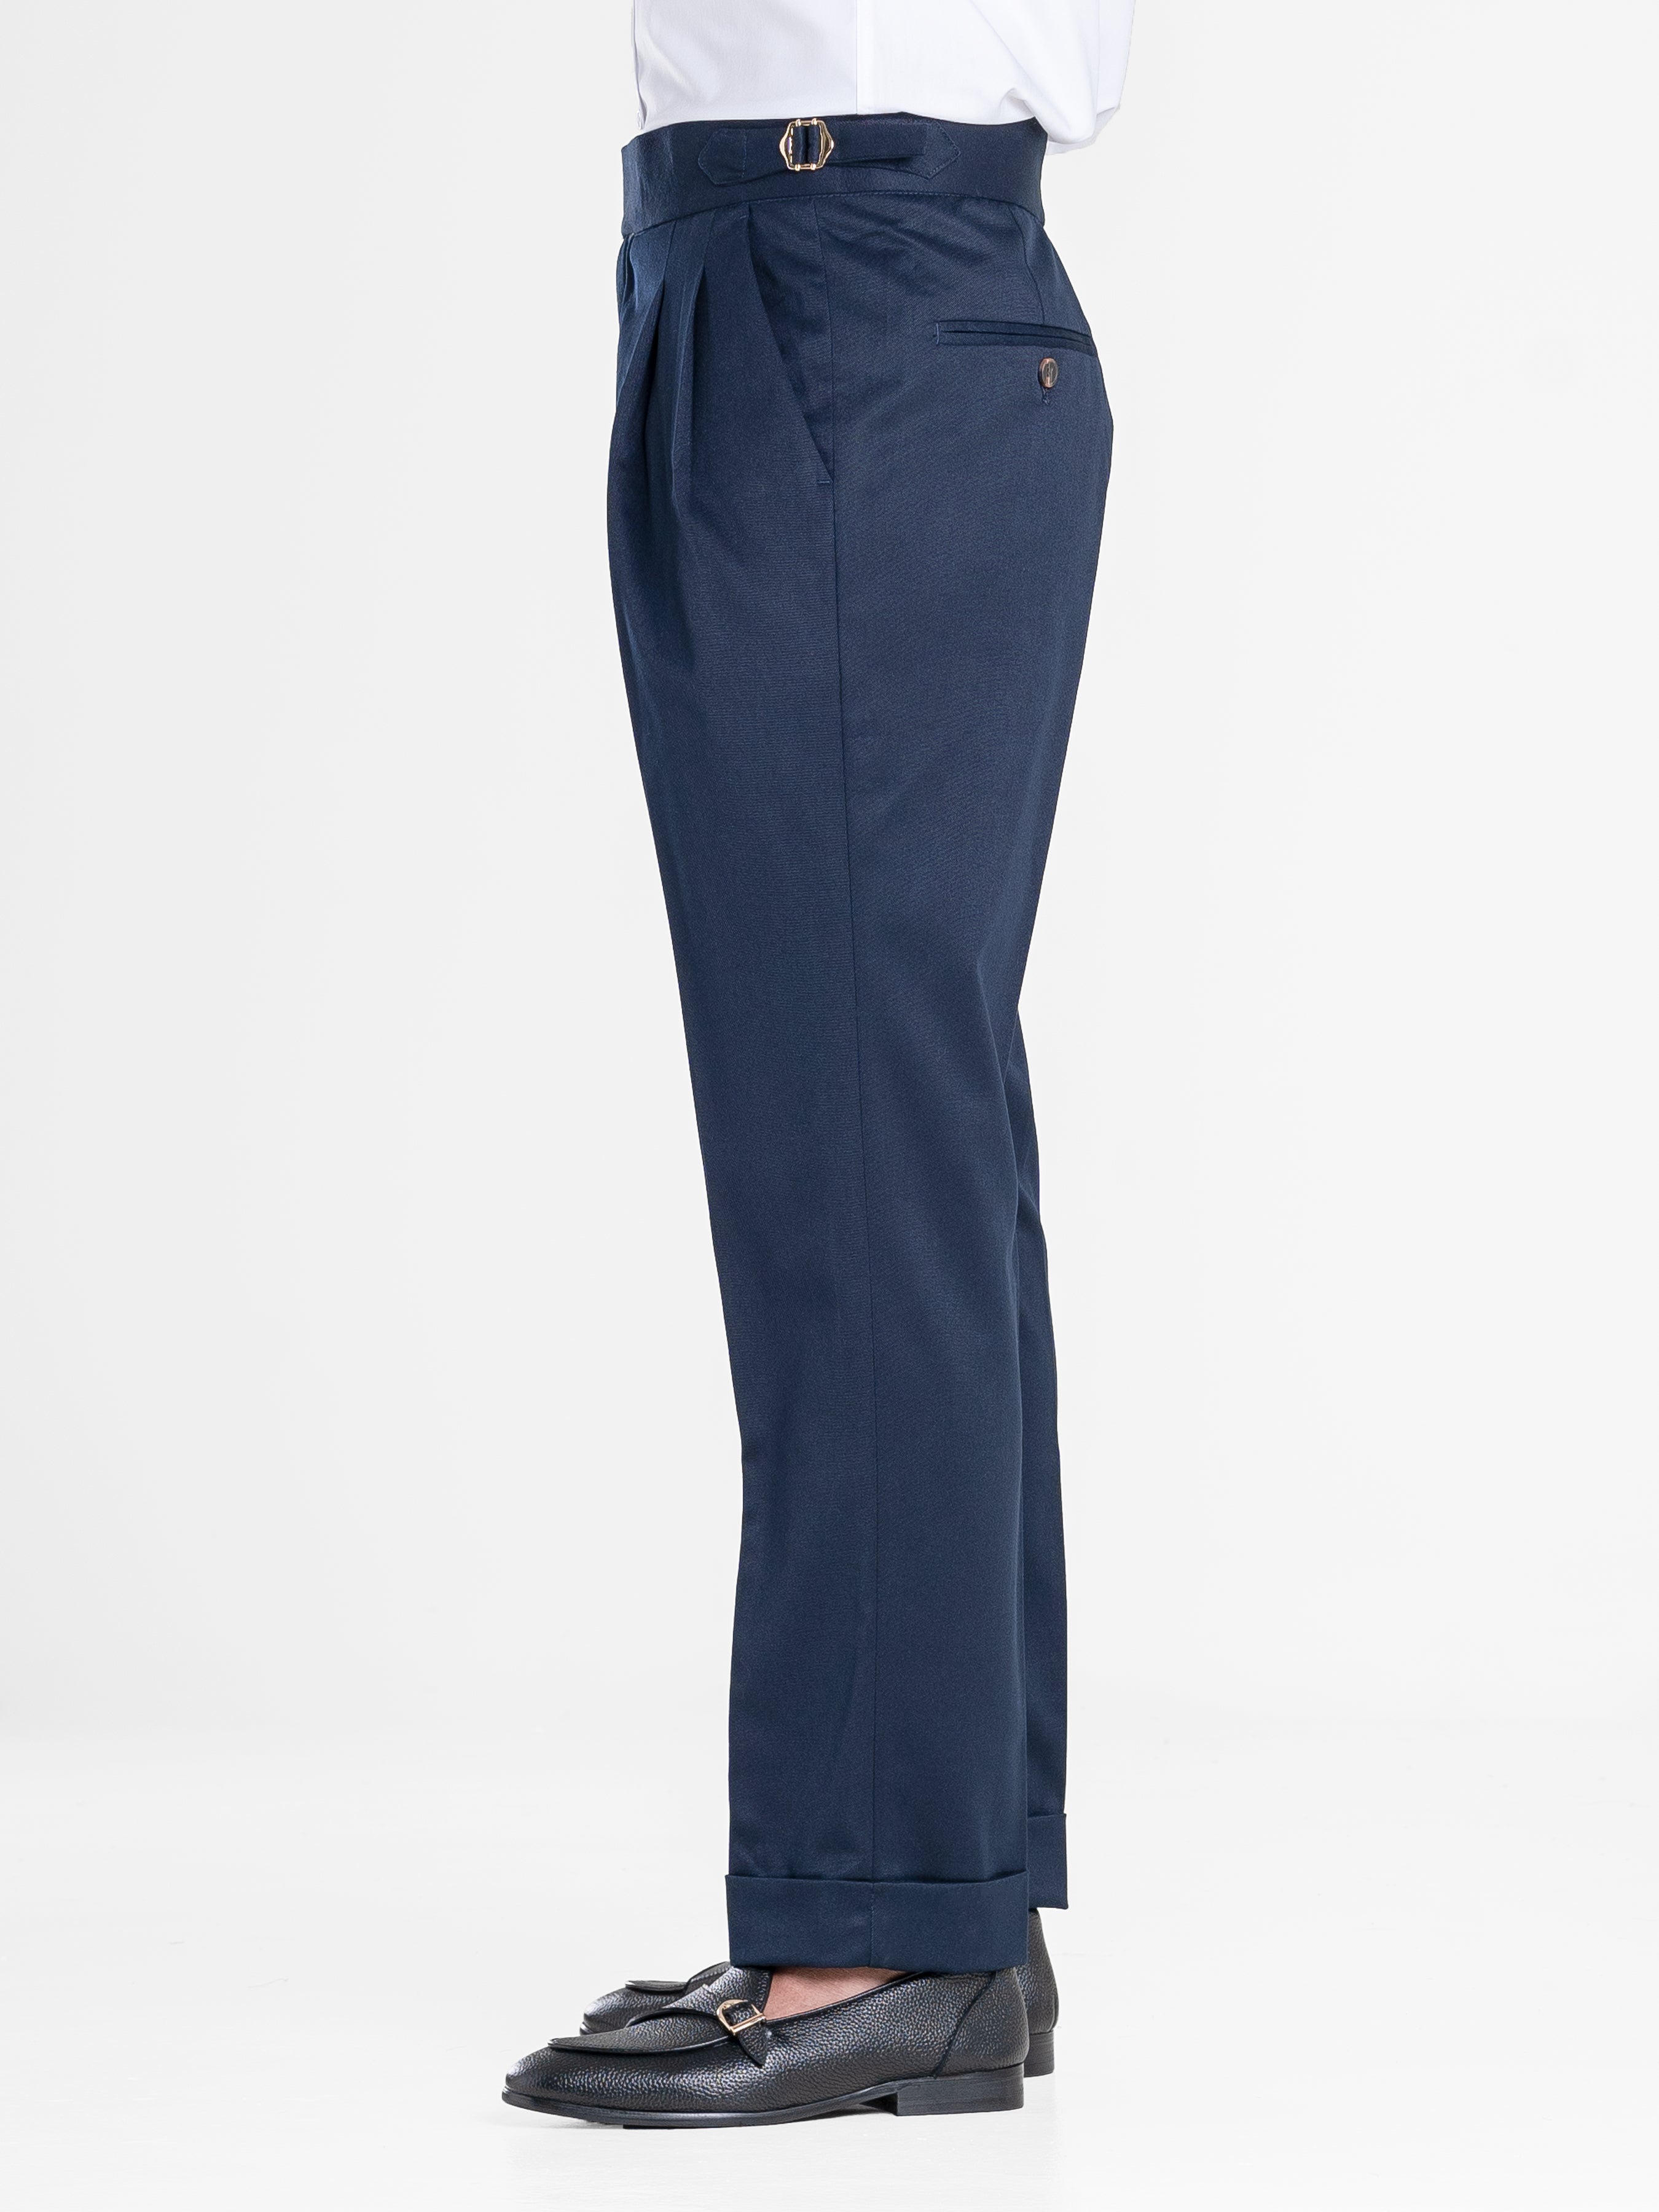 Trousers With Side Adjusters - Deep Blue Plain Cuffed (Stretchable)